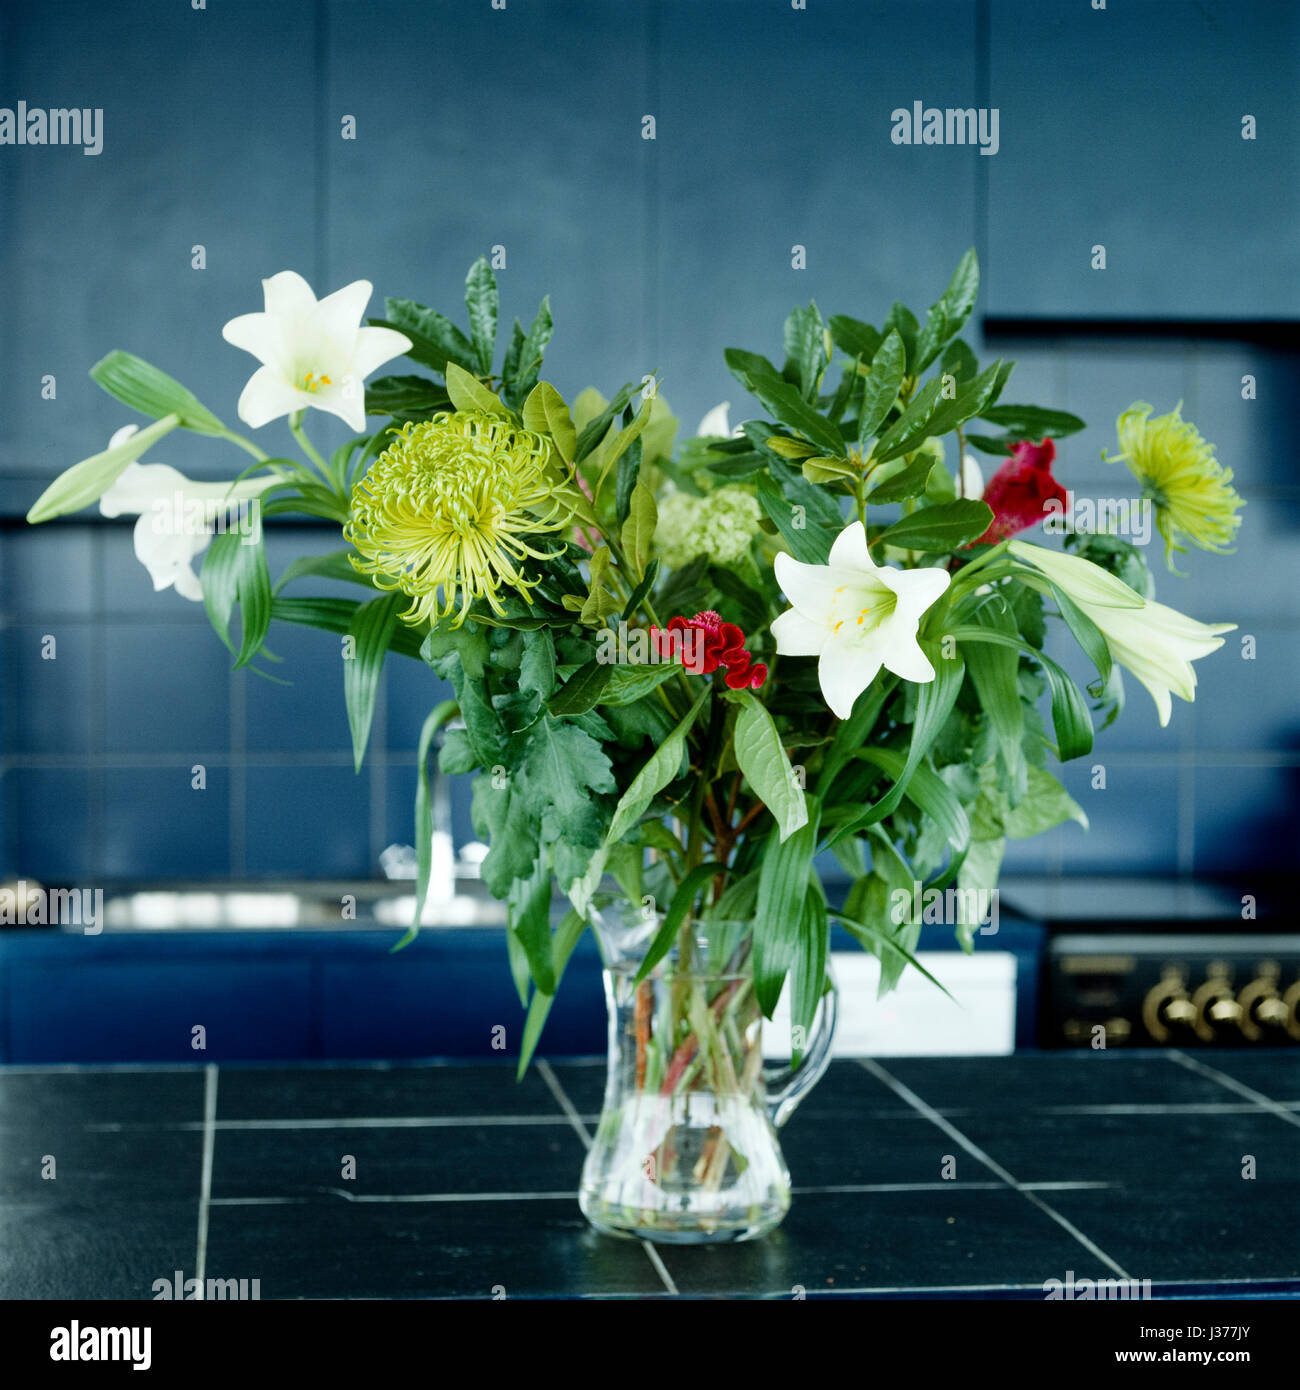 Vase of flowers on kitchen bench top. Stock Photo